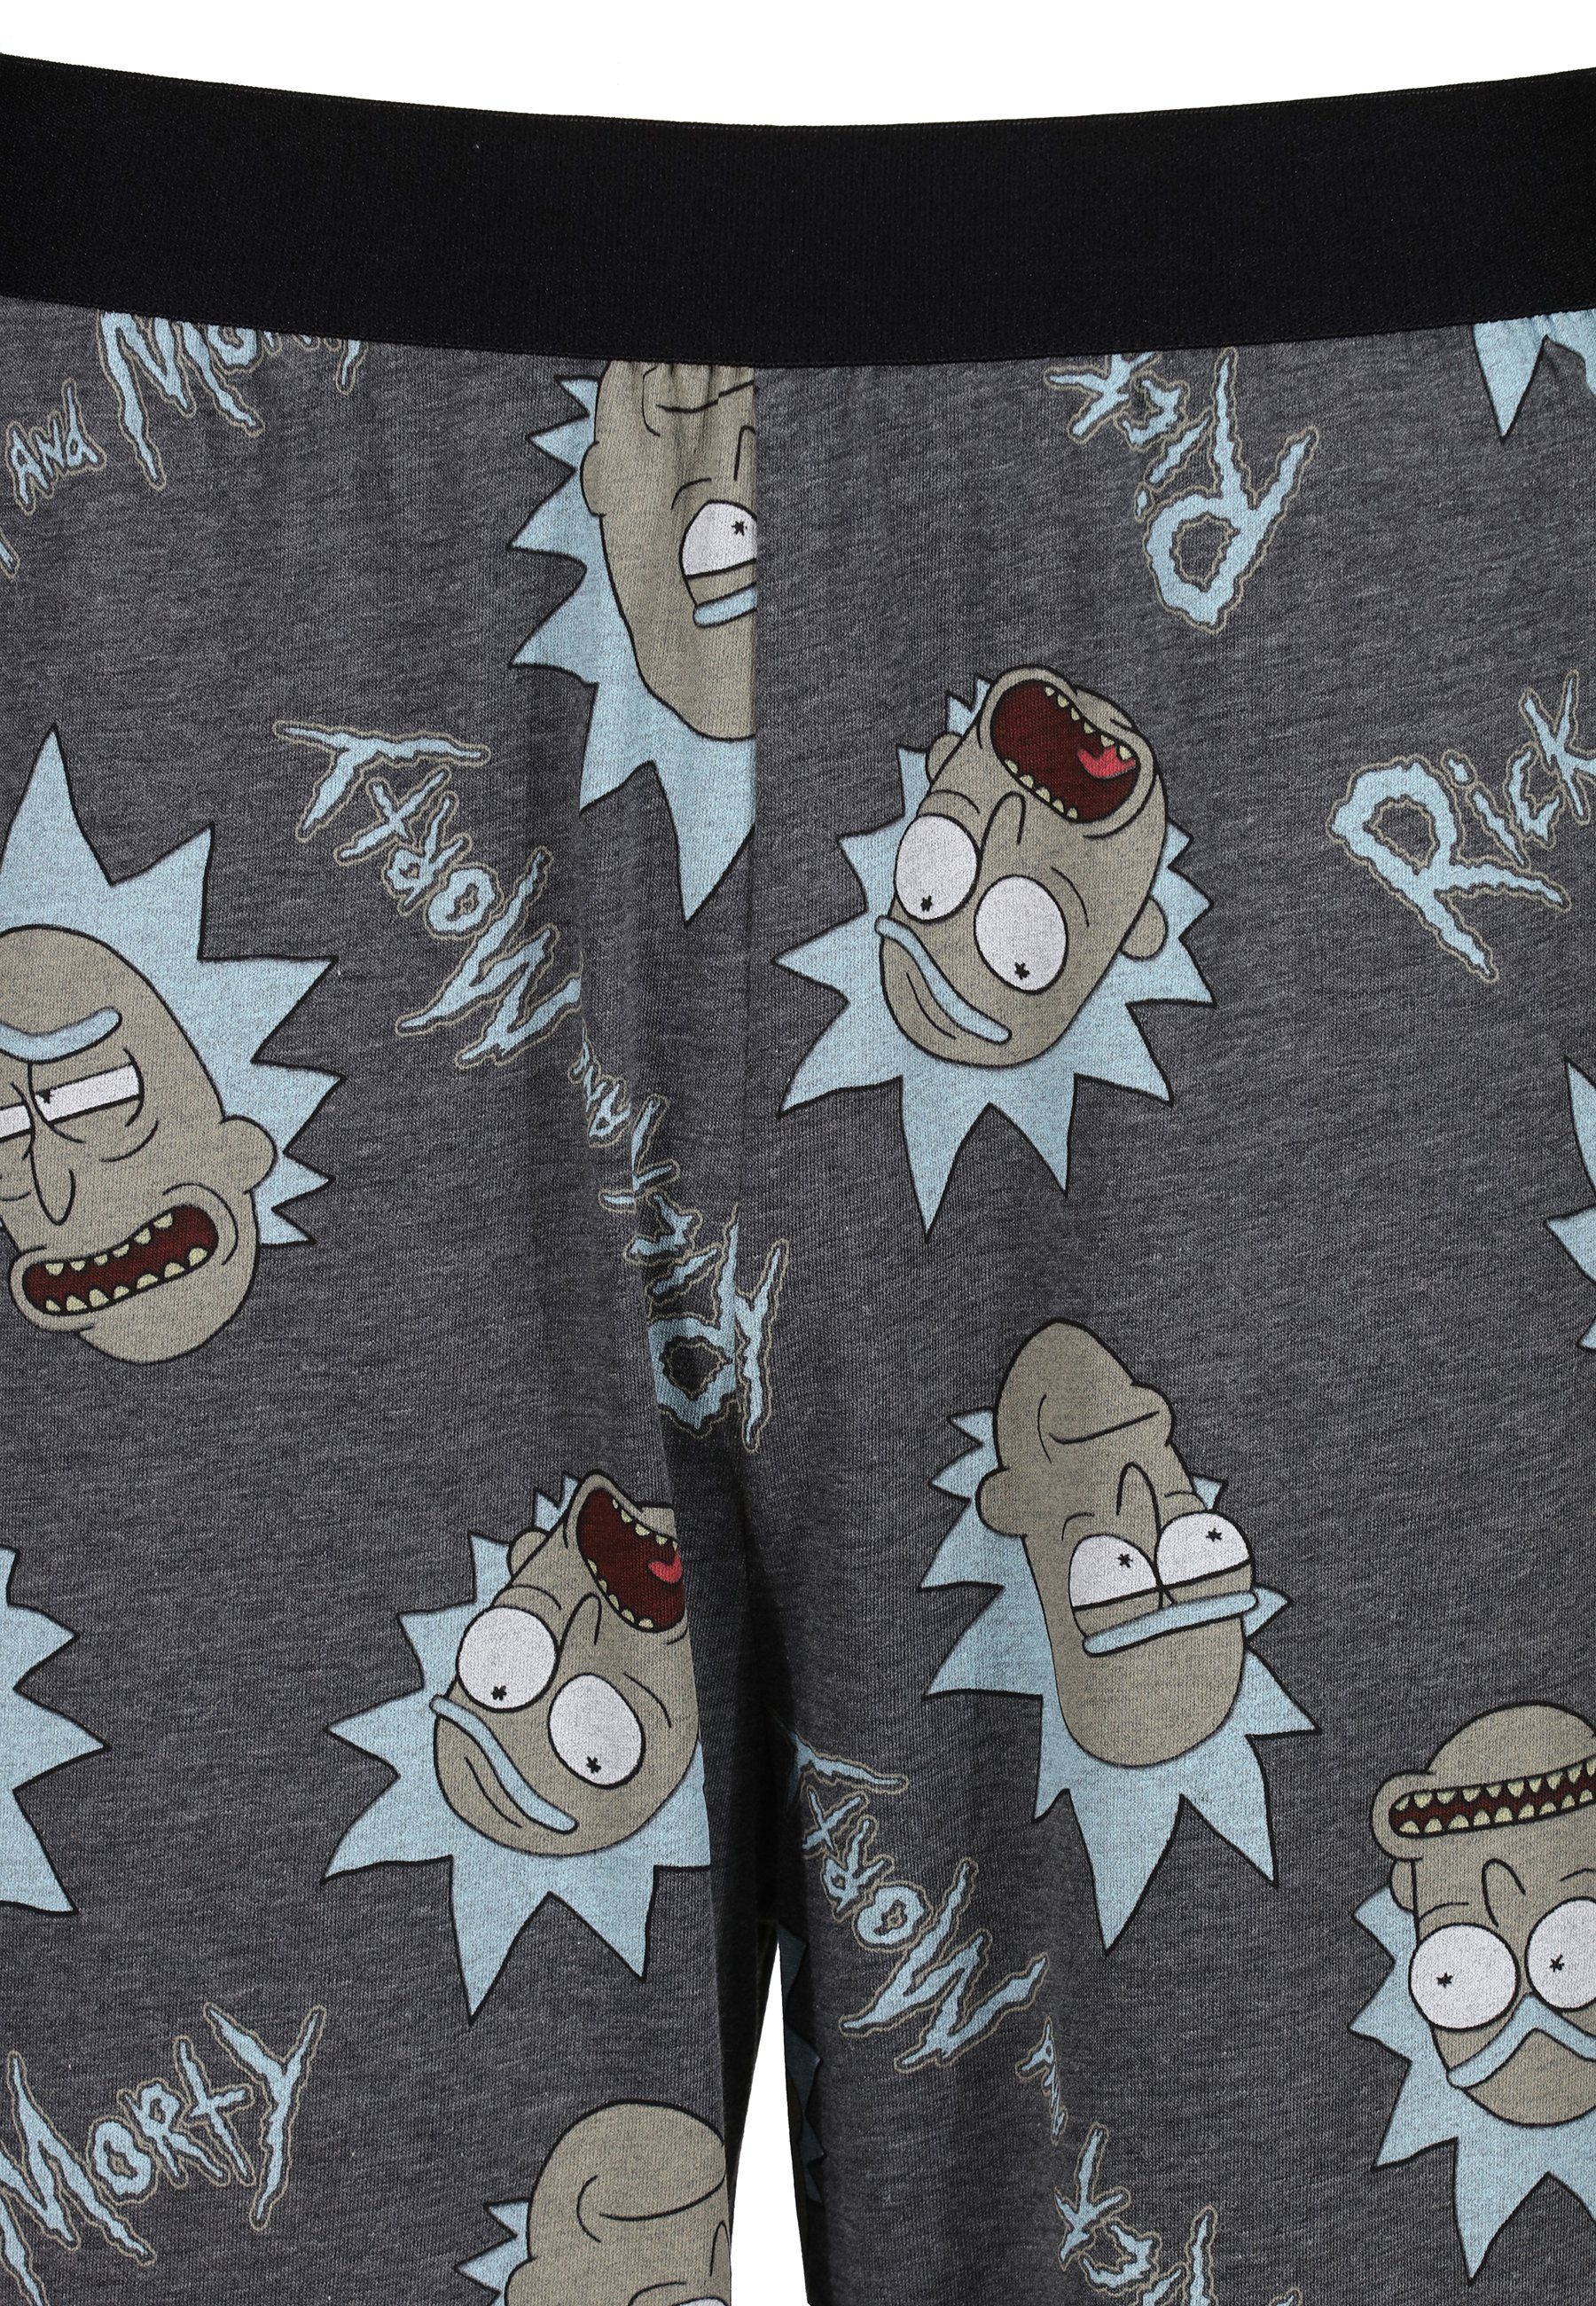 Recovered Loungepants Lounge Pant Faces Morty print all - - over Logo Rick grey and and